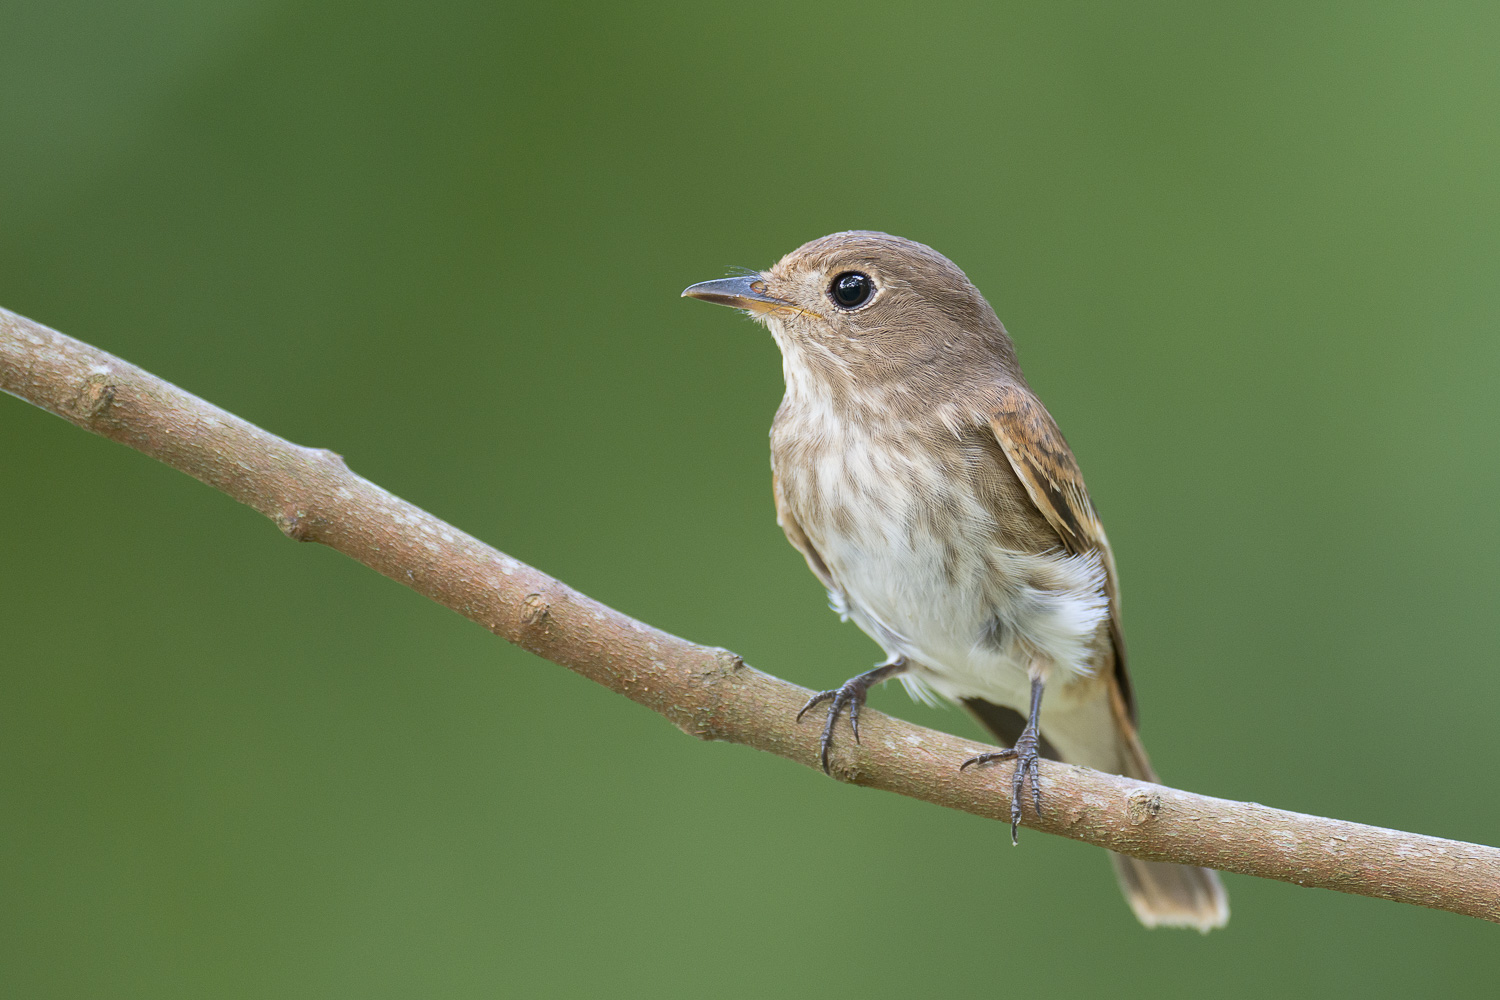 Brown-streaked Flycatcher at Choa Chu Kang Park on 12 Aug 2022. Photo credit: Francis Yap